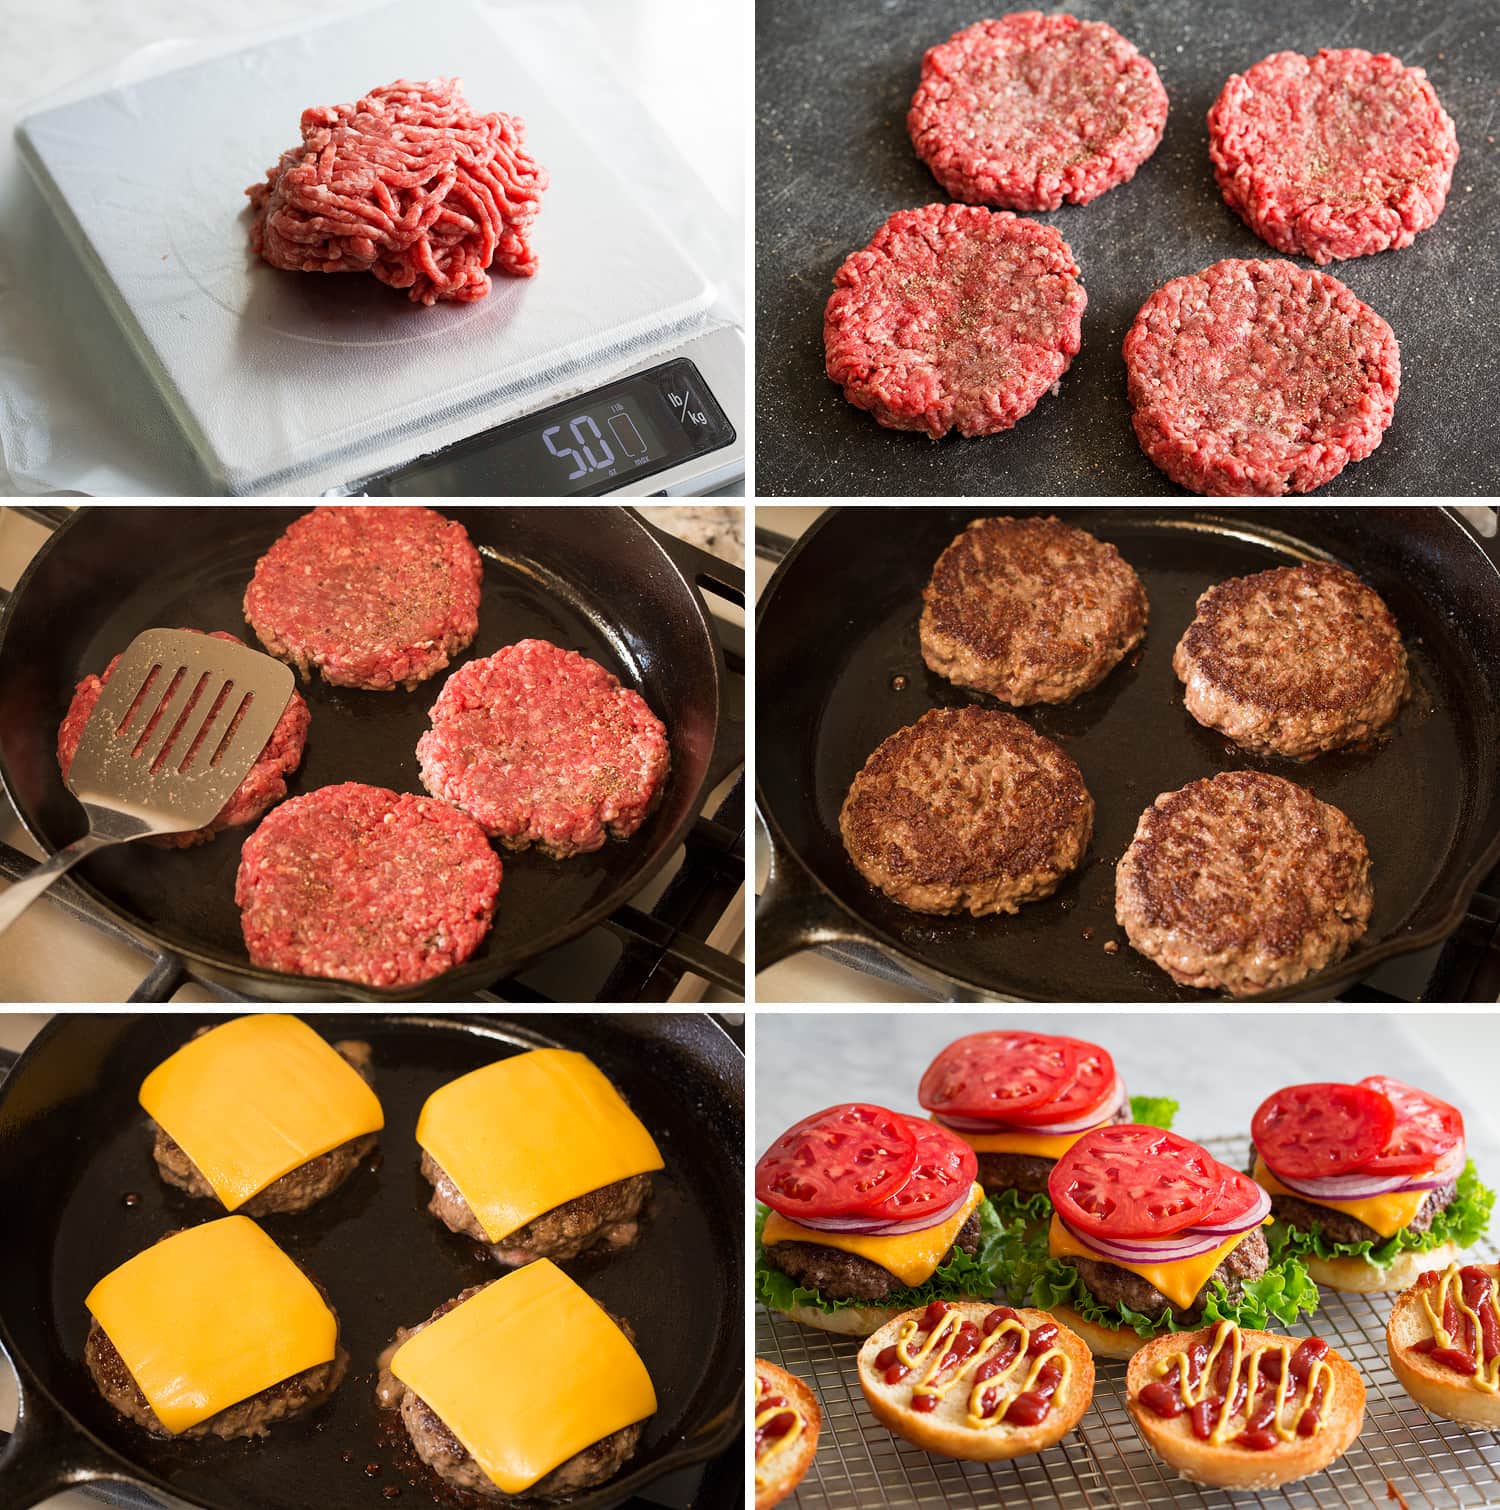 Shaping hamburger patties, cooking on stove, then assembling with bun and toppings.